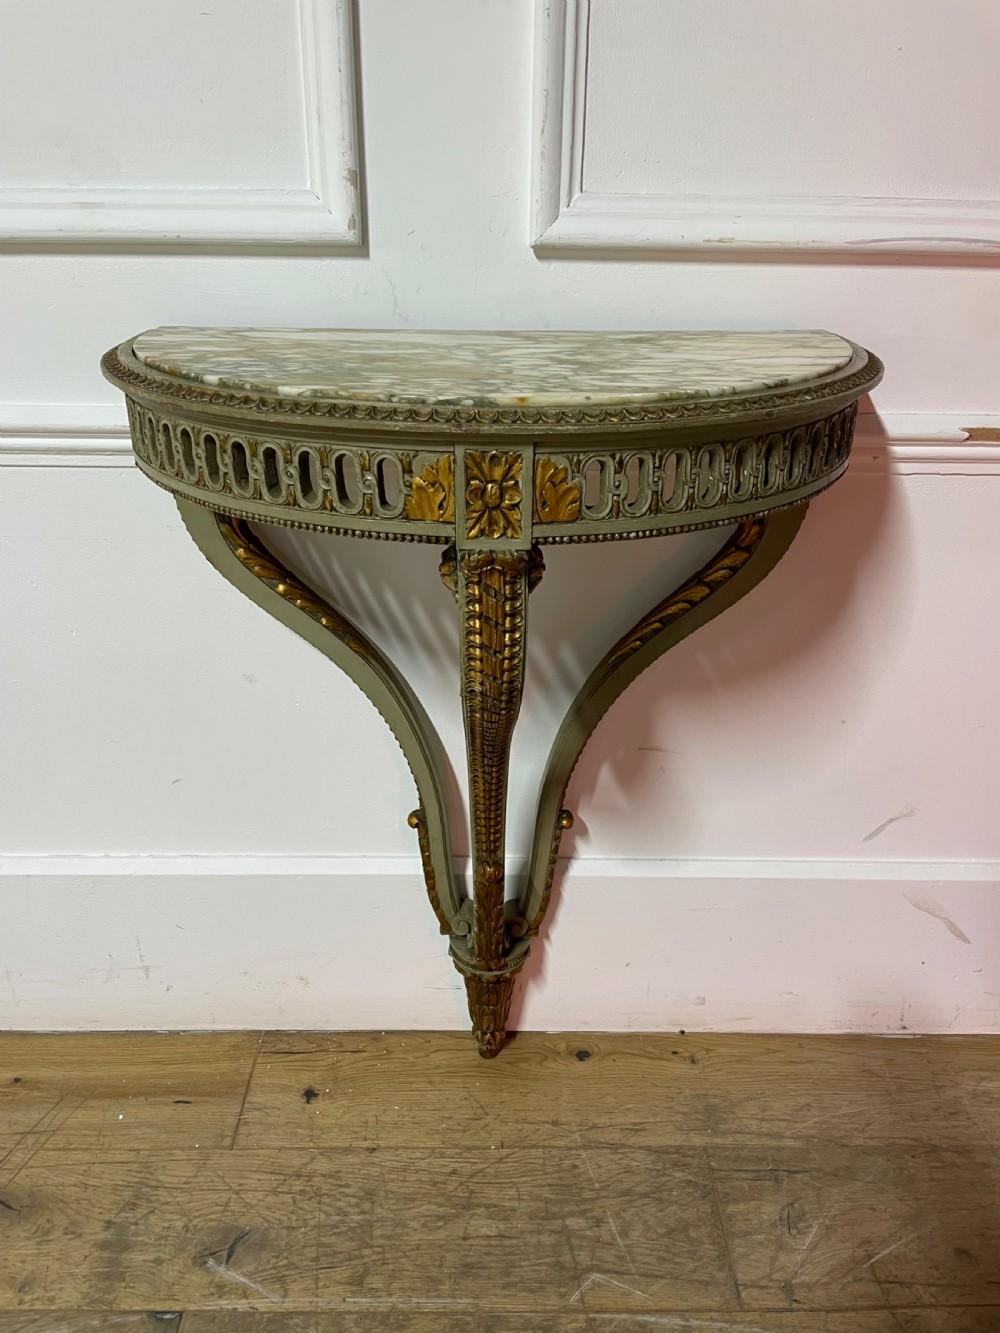 Early 20th century, very pretty Louis XVI style painted Demi lune console table.
French circa 1900.With original paint Finish and marble.
Height 33.5 inches
Width 24 inches
Depth 13.5 inches